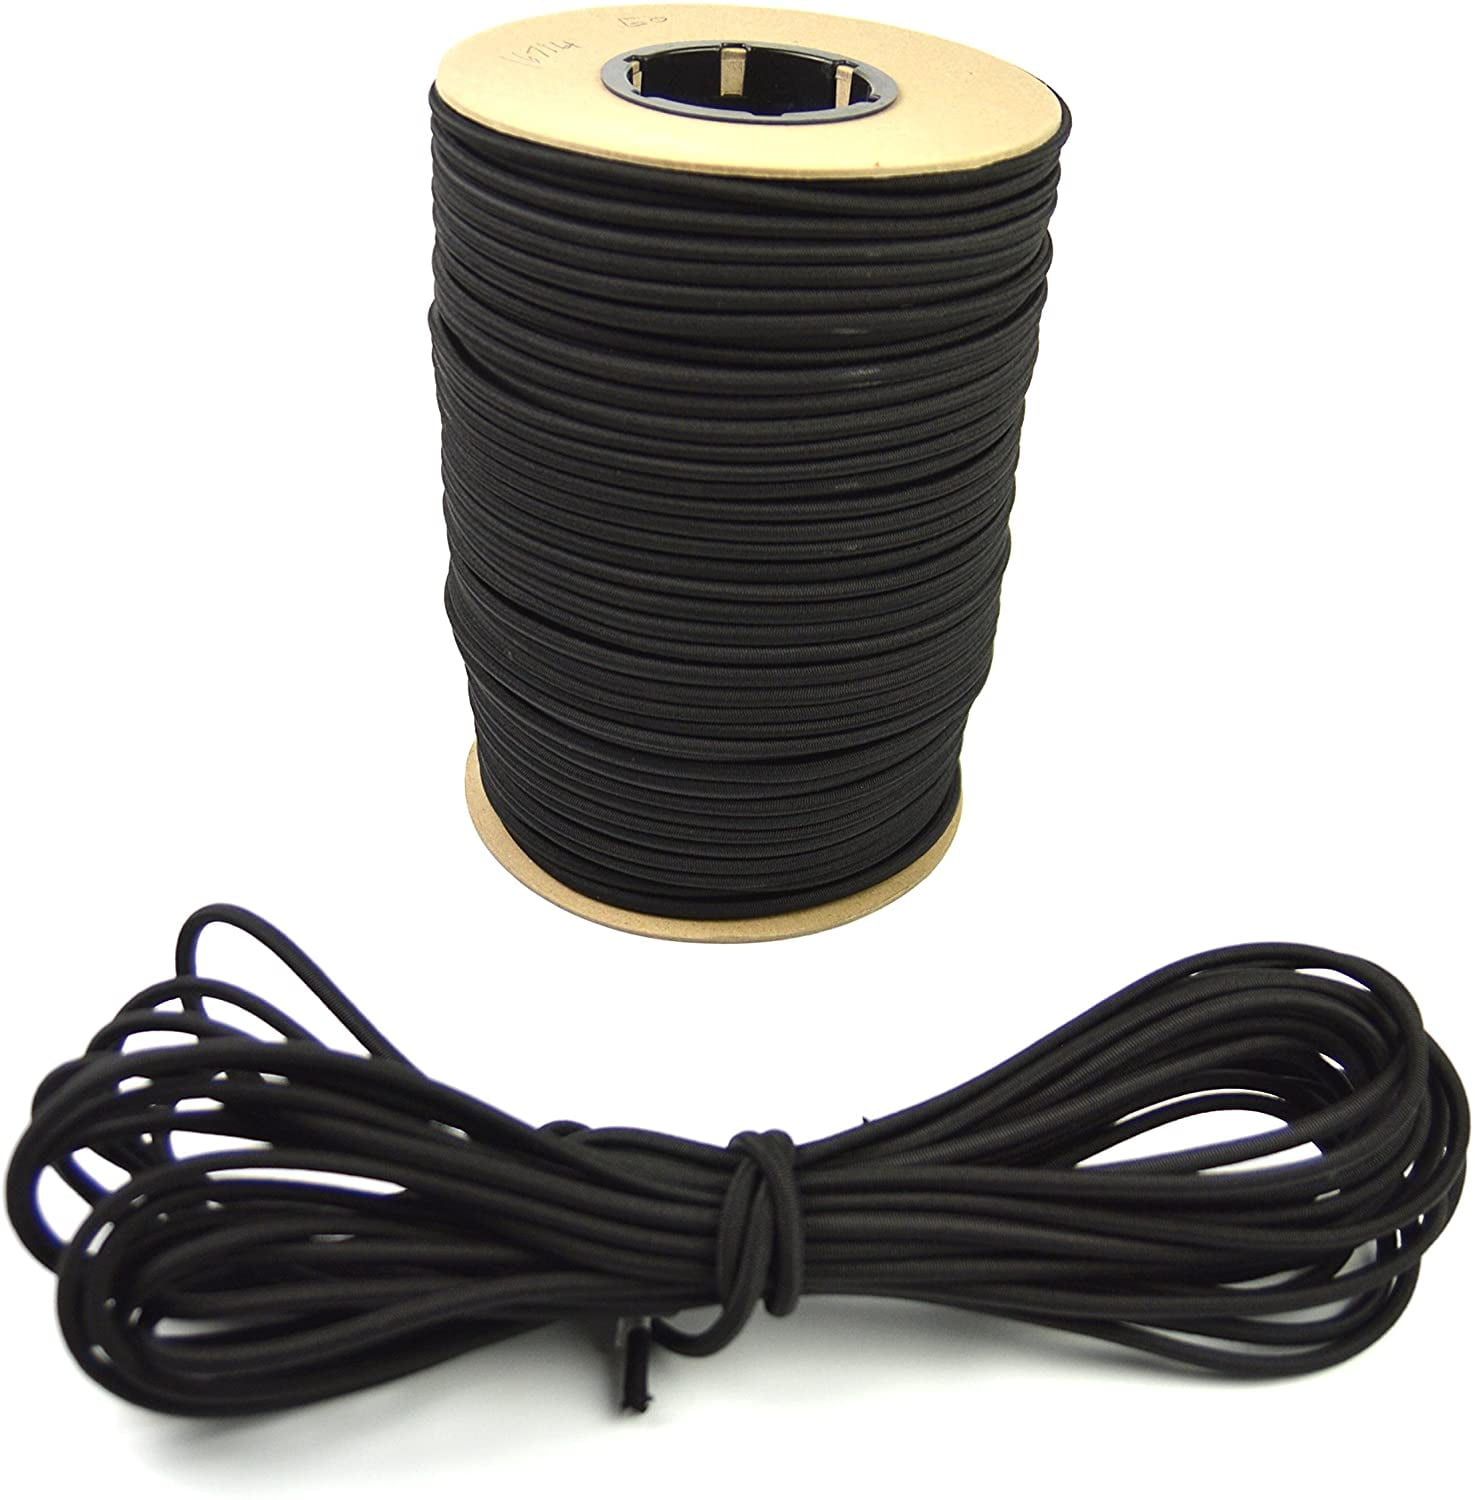 1/8" X 500 FT Bungee Cord Shock Cord Bungie Cord Marine Grade Made in USA!! BLK 